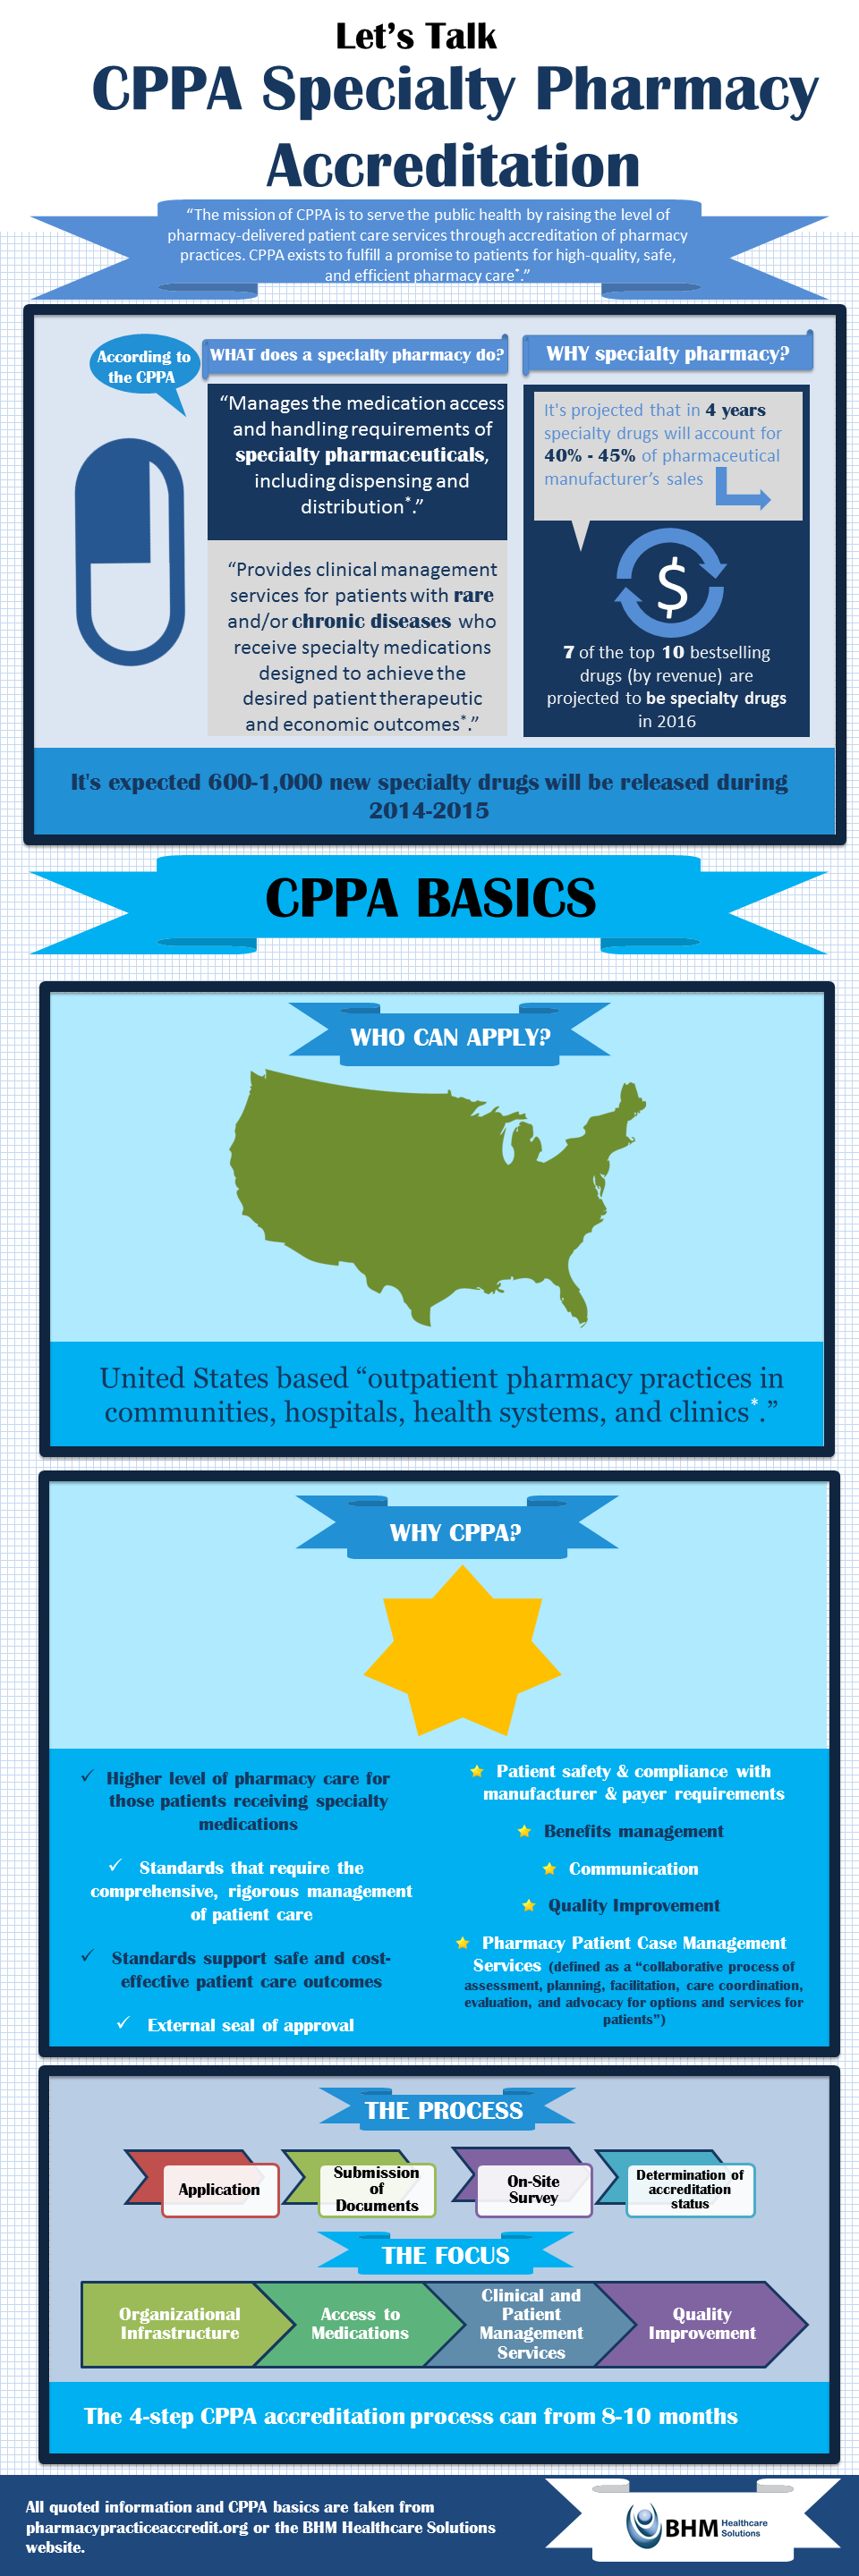 CPPA Specialty Pharmacy Accreditation infographic